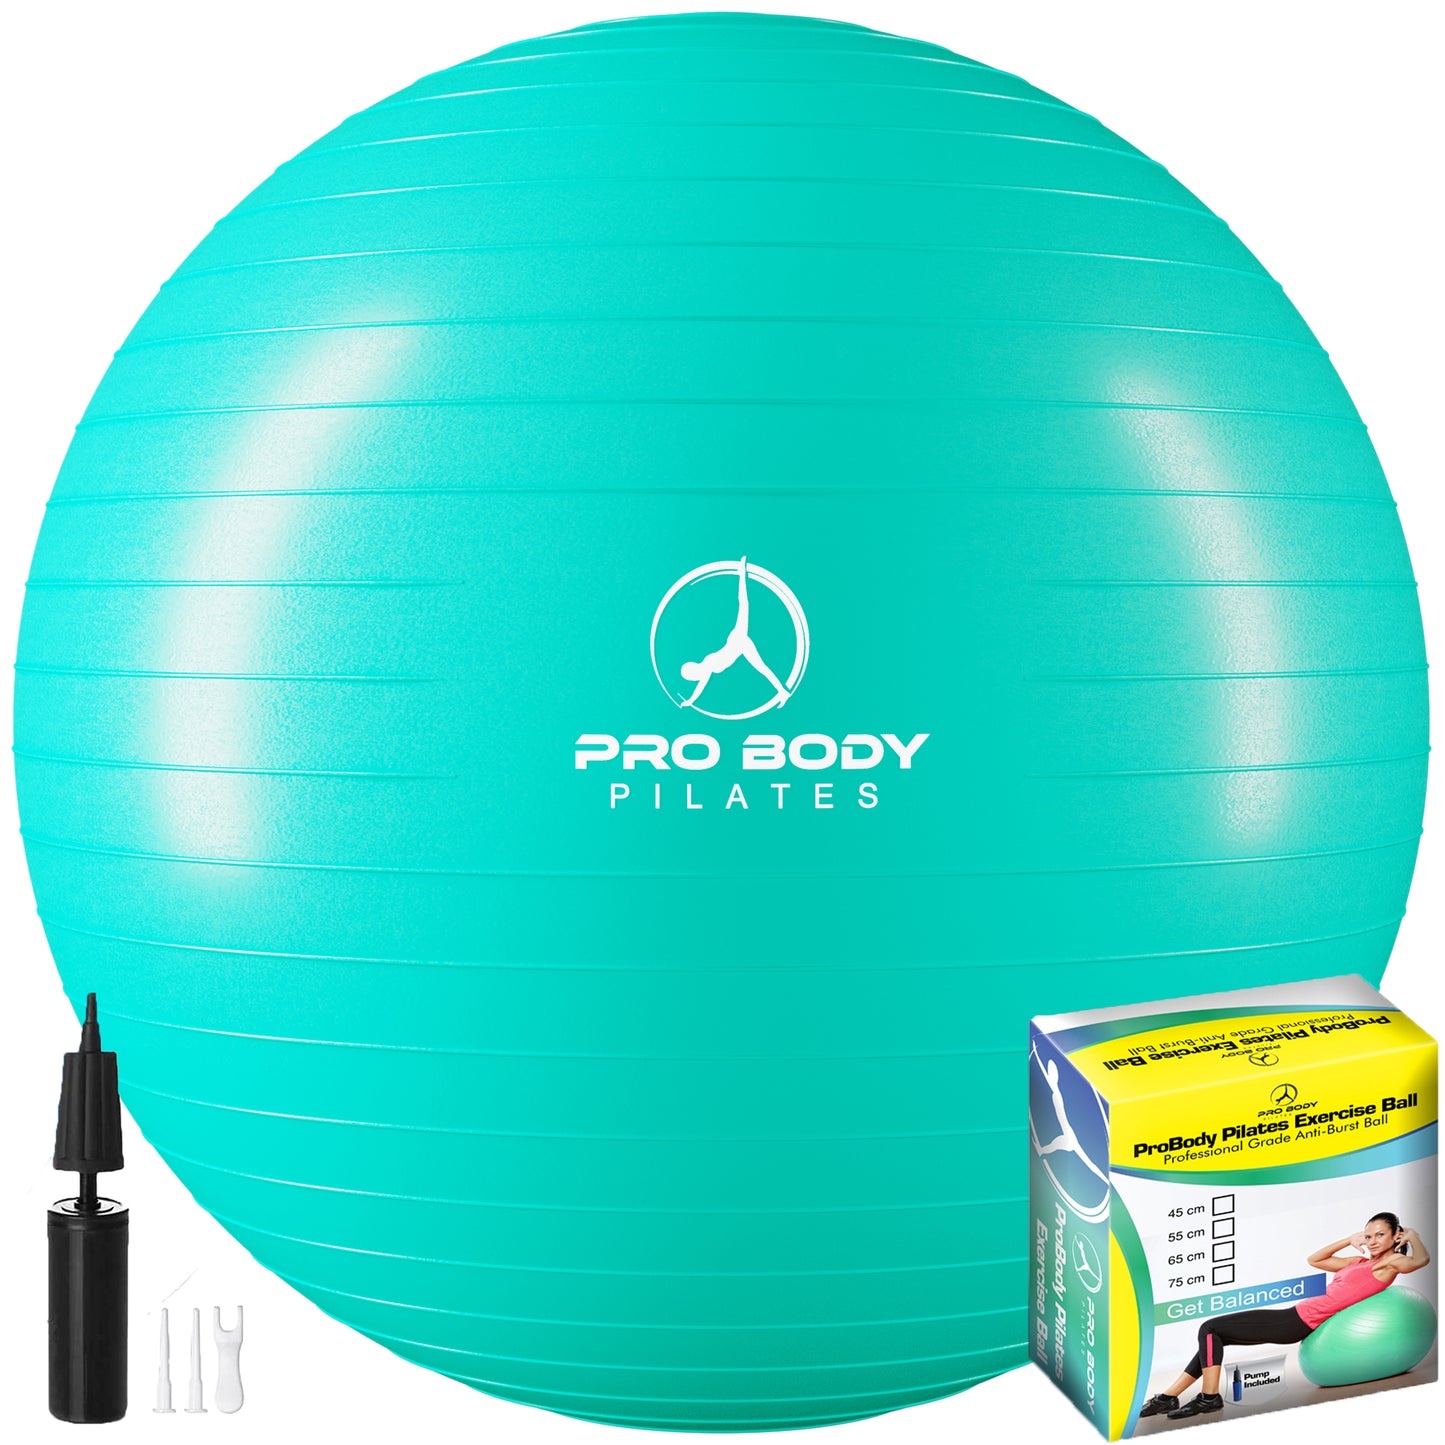 Yoga Ball for Pregnancy, Fitness, Balance, Workout at Home, Office and Physical Therapy (Aqua)